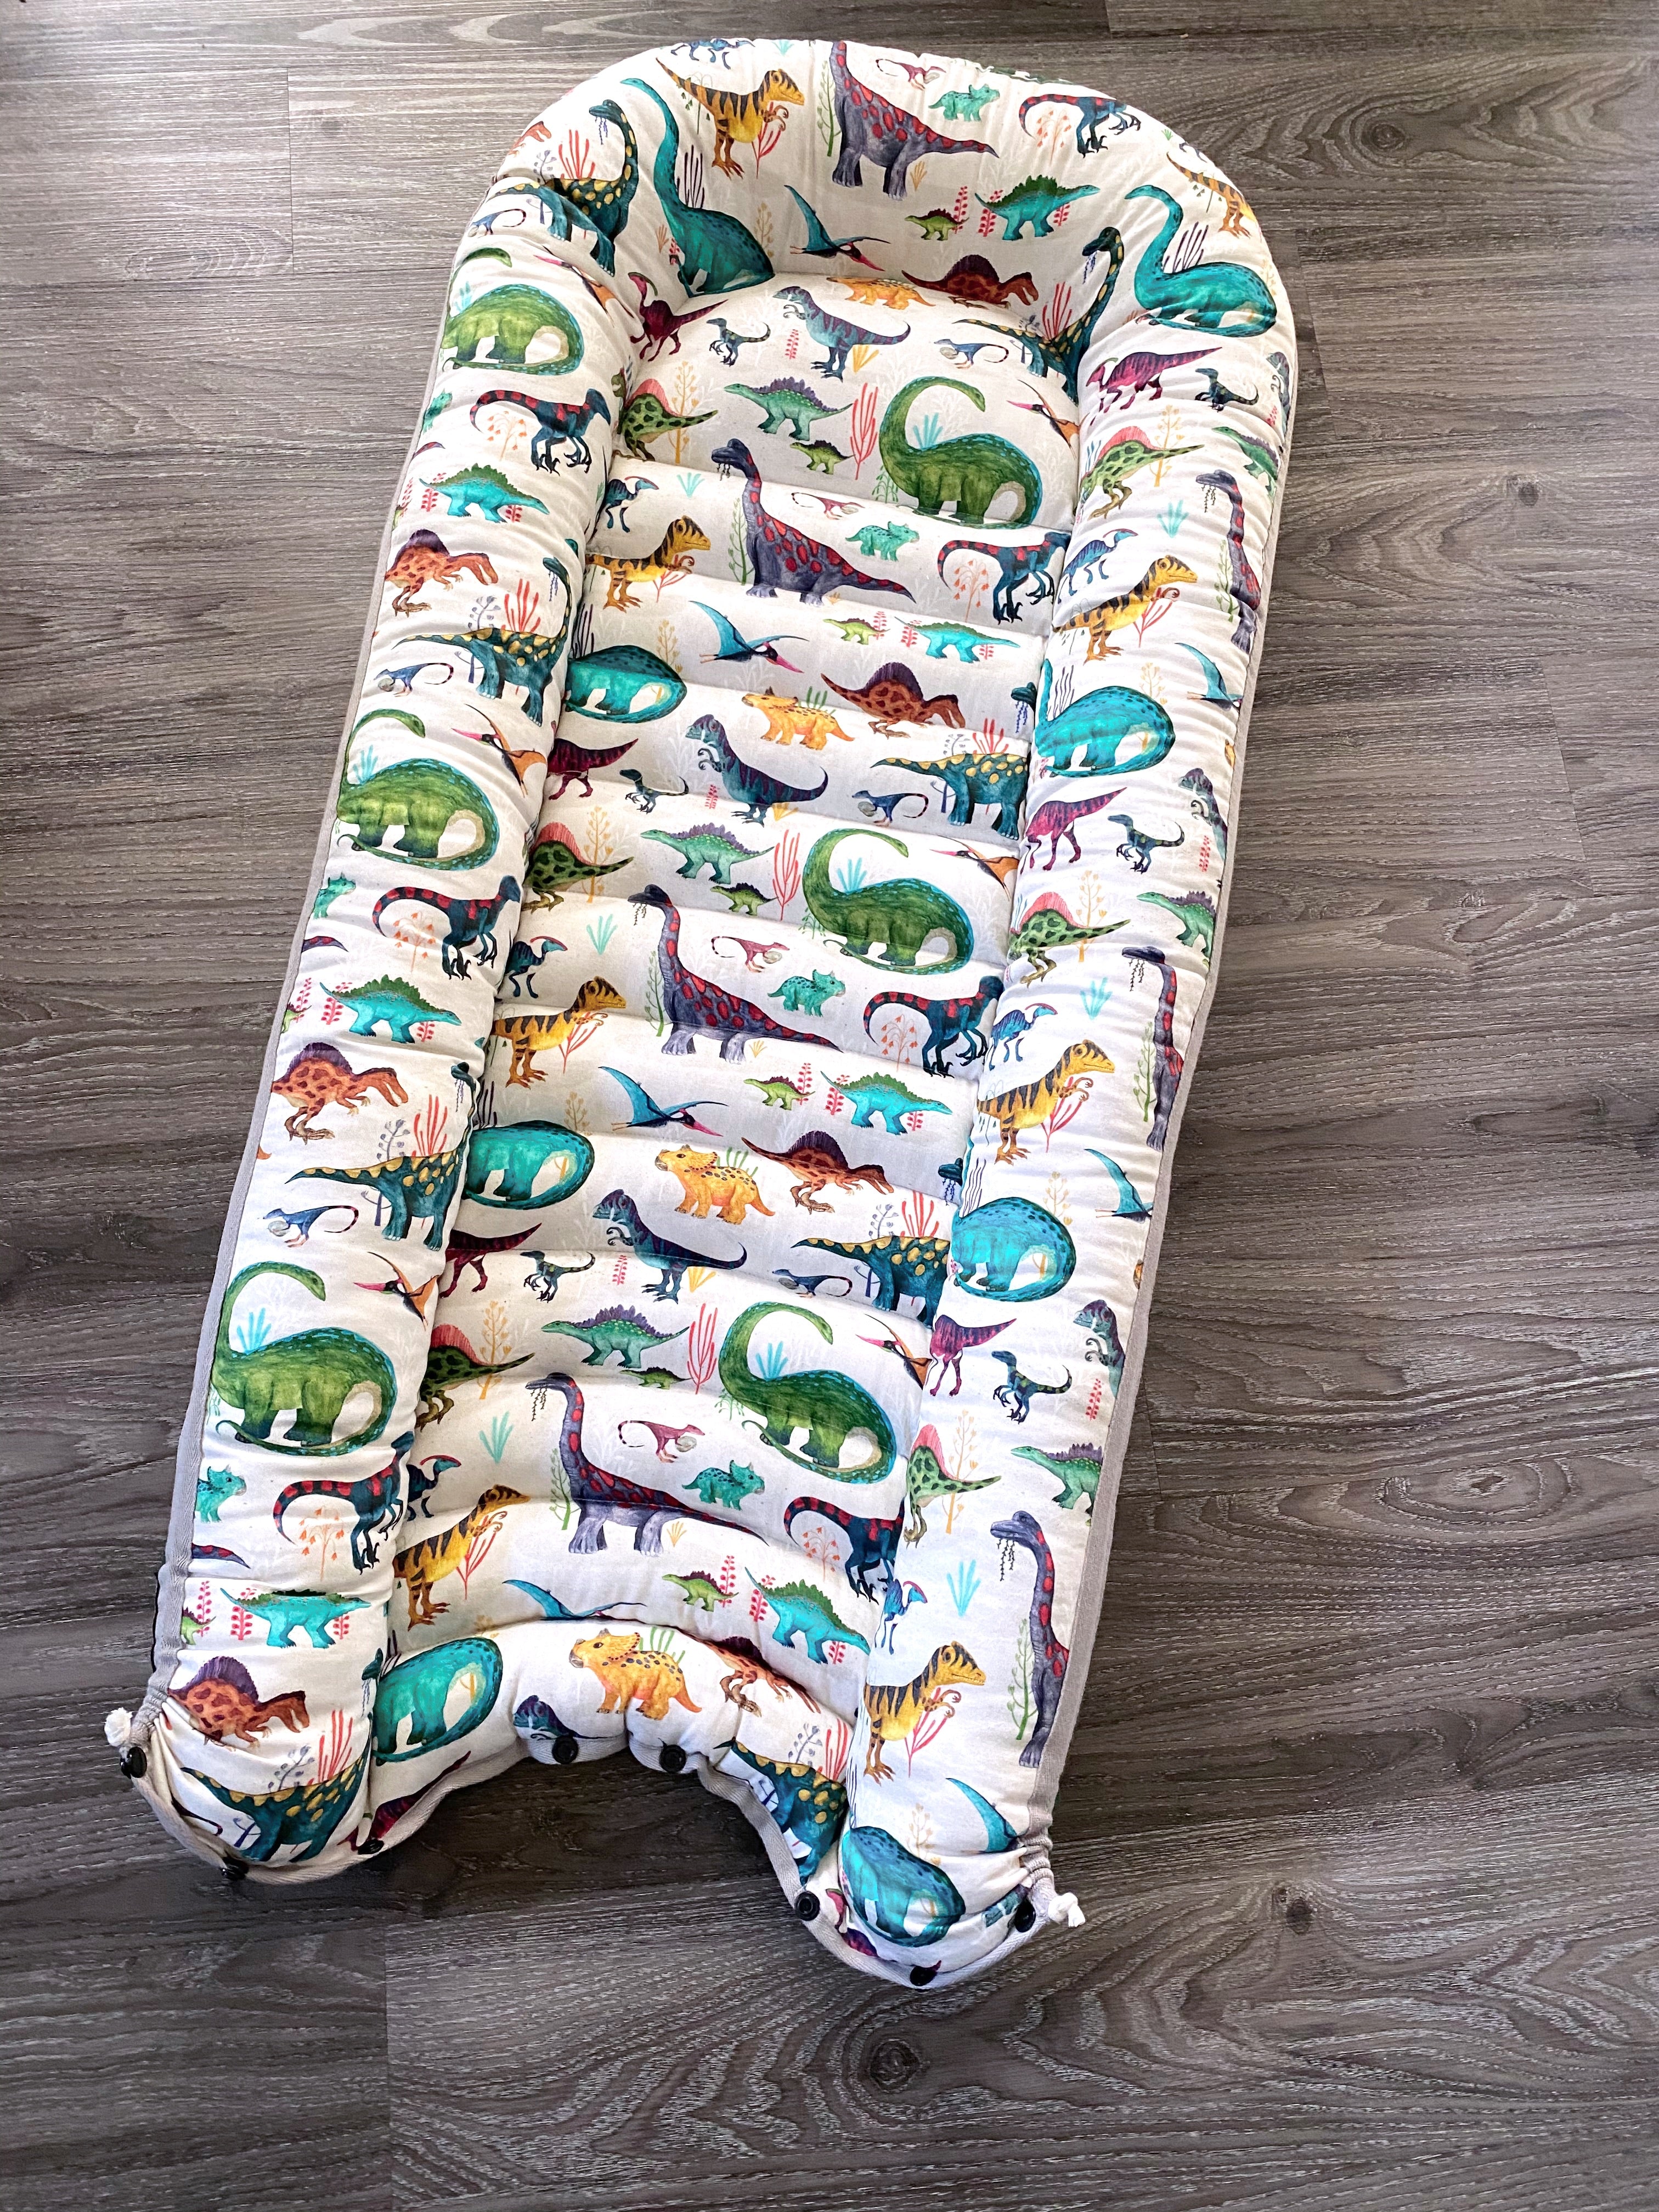 baby nest , baby lounging nest, co-sleeper, similar to dockatot and snuggle me products. This one is featured in a bright dino and green design.